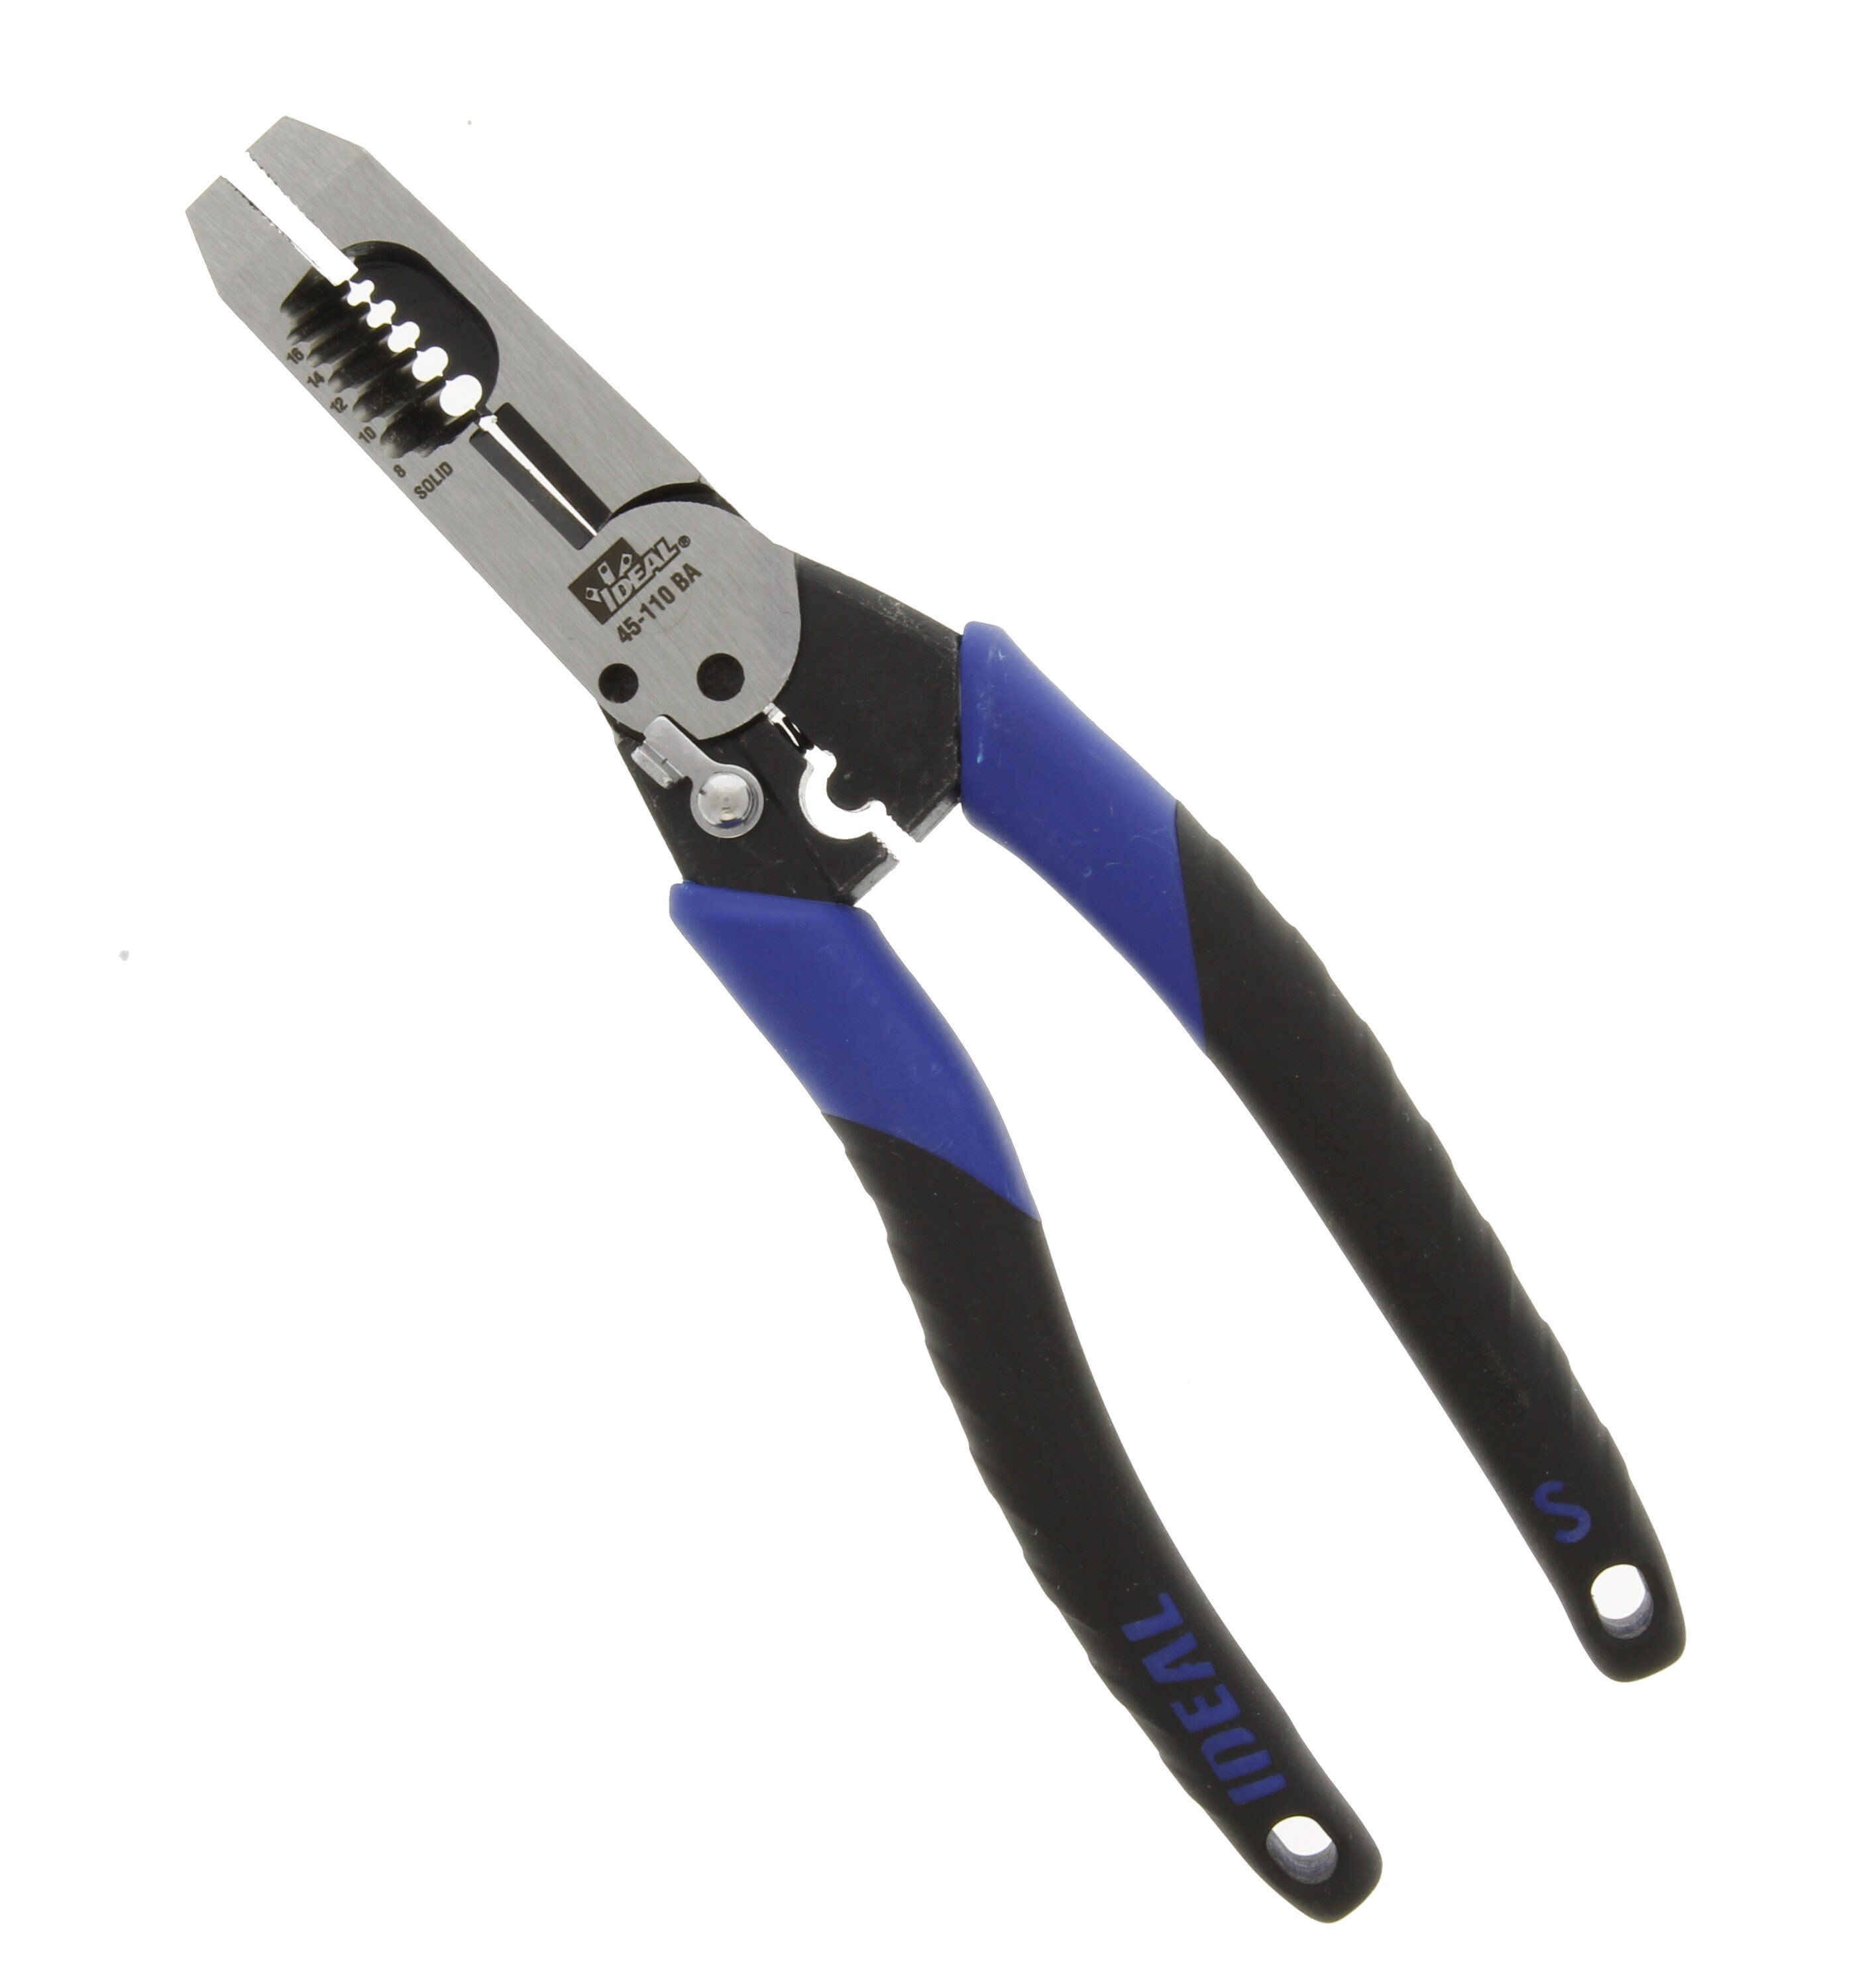 Wire Stripper Cutters Hand Tools Crimping Tool Plier Electrical Cable Cutter UK 